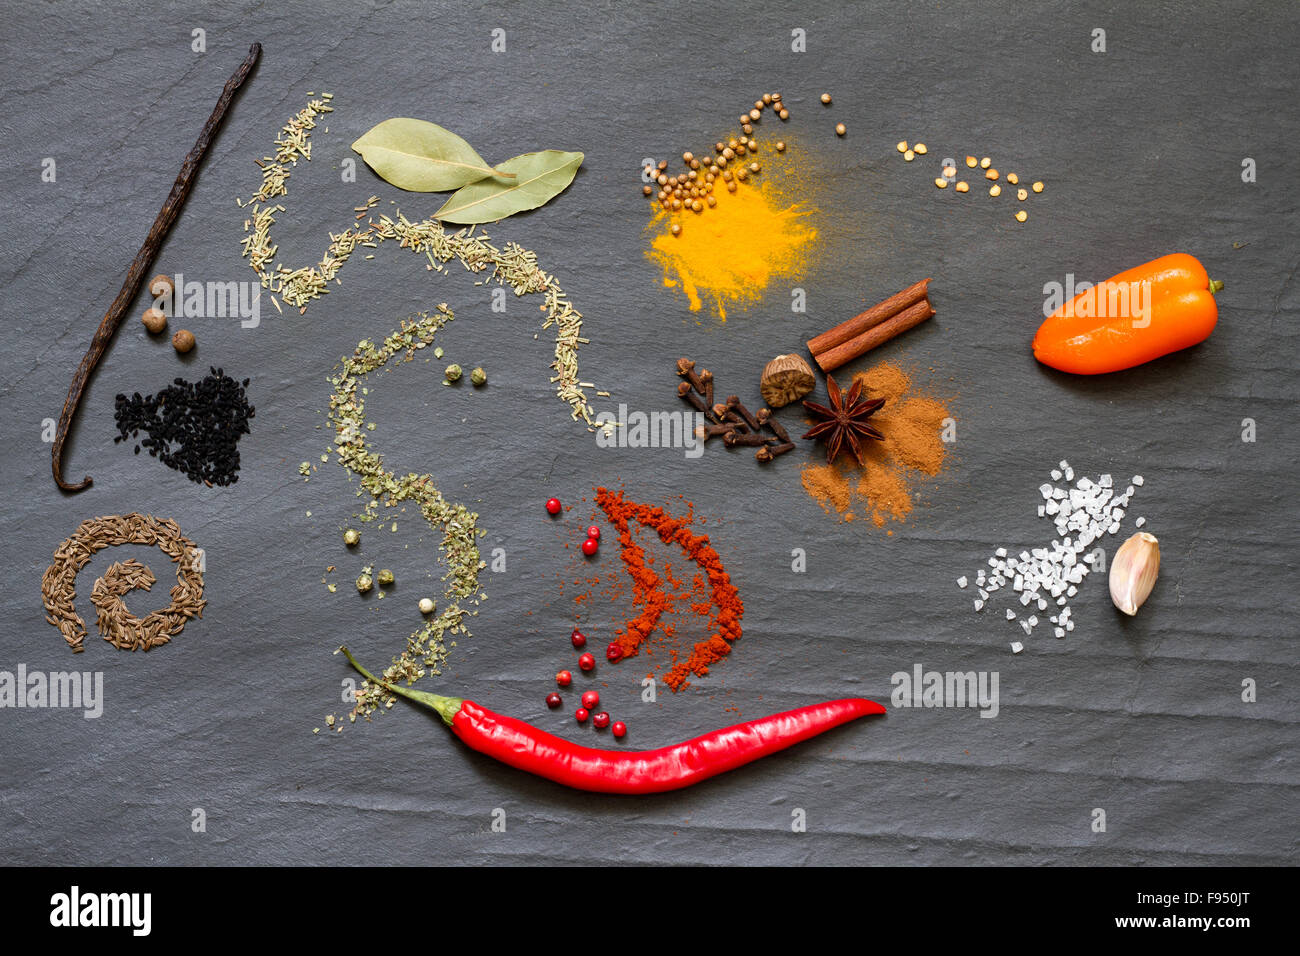 Spices and herbs on black marble abstract background concept Stock Photo